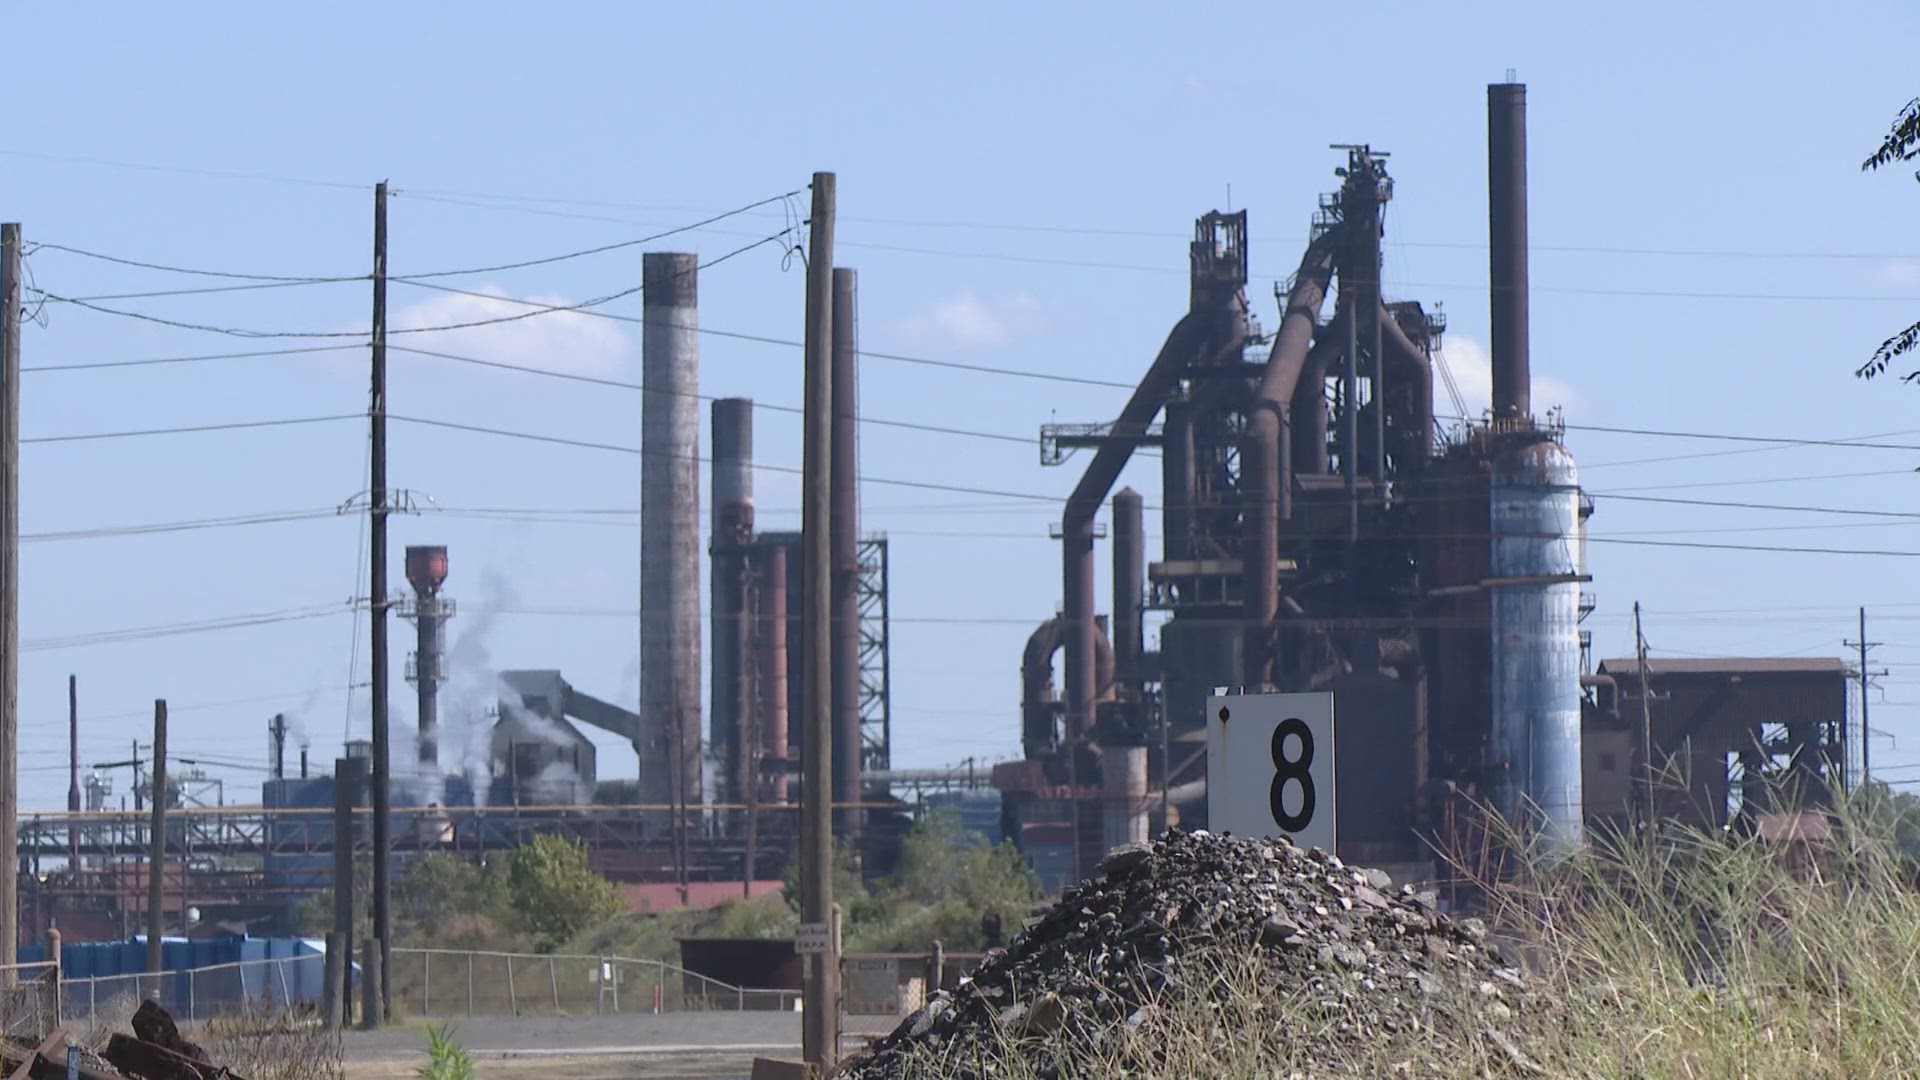 Nearly 300 primary workers were laid off Monday at the Granite City Works plant. The company faults the UAW strike, saying there's been a decreased demand.